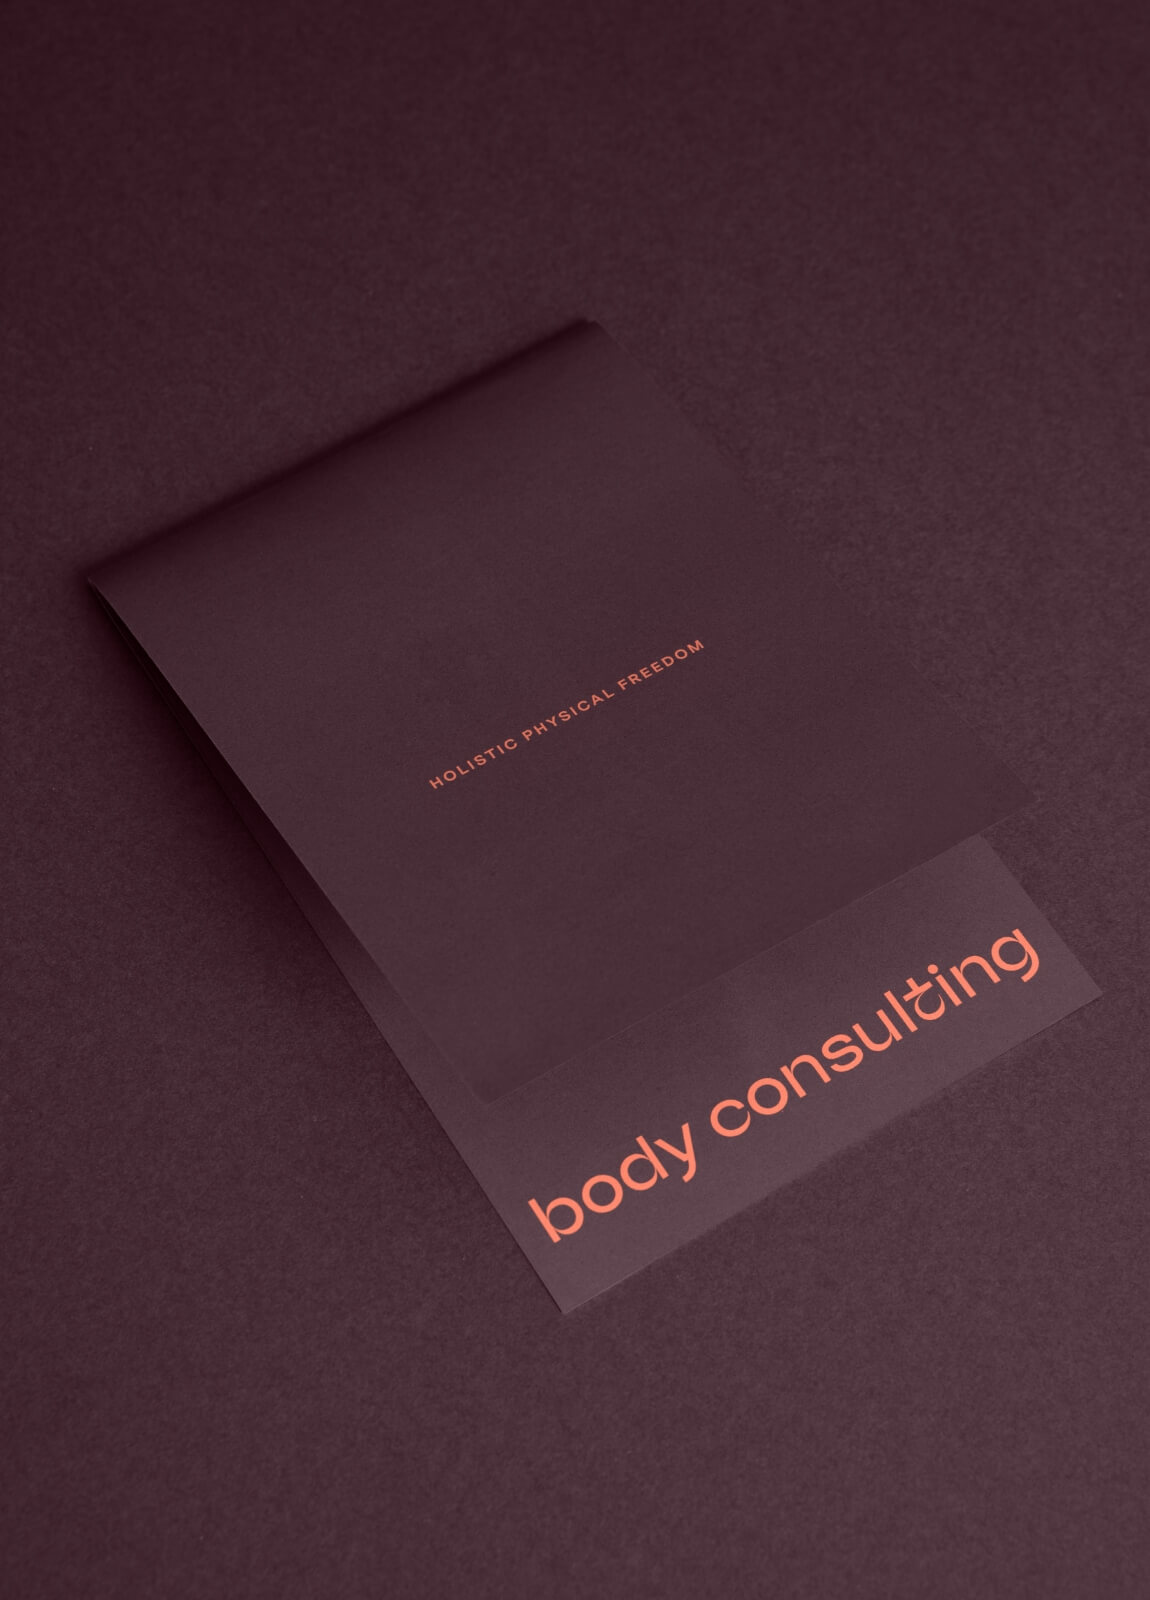 body consulting flyer, closed